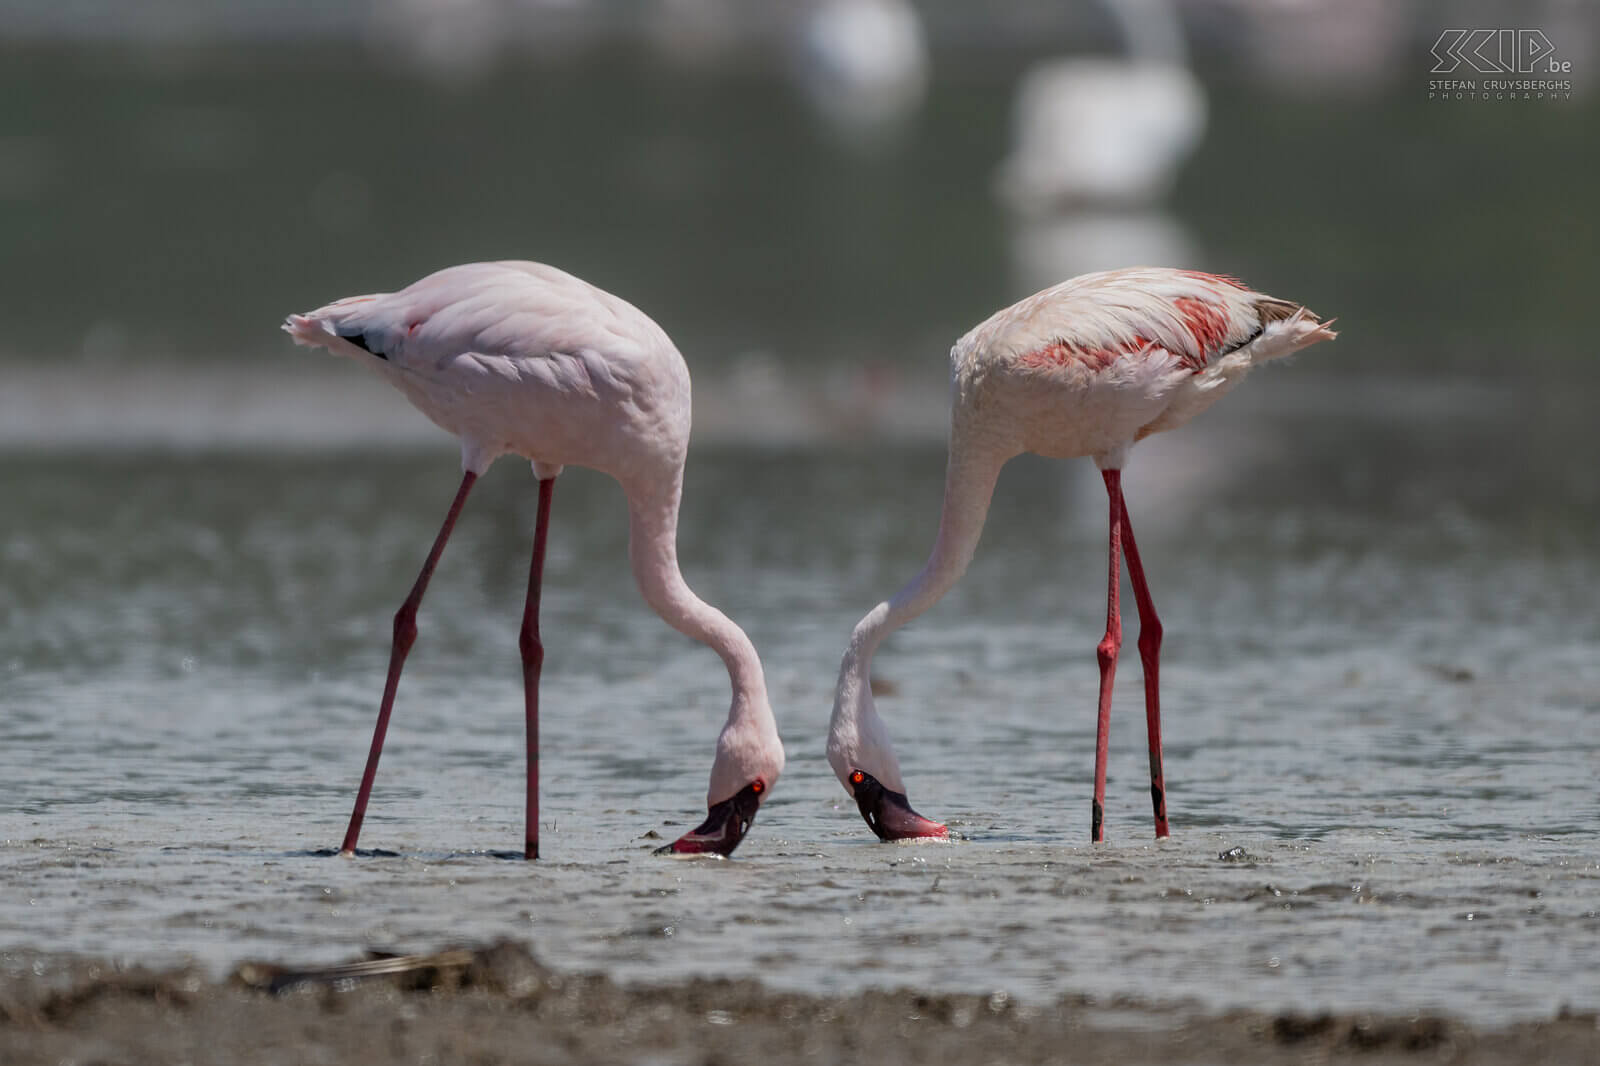 Nakuru NP - Lesser flamingos The lesser flamingo is smaller than the greater flamingo. Its plumage is a darker shade of pink. Stefan Cruysberghs